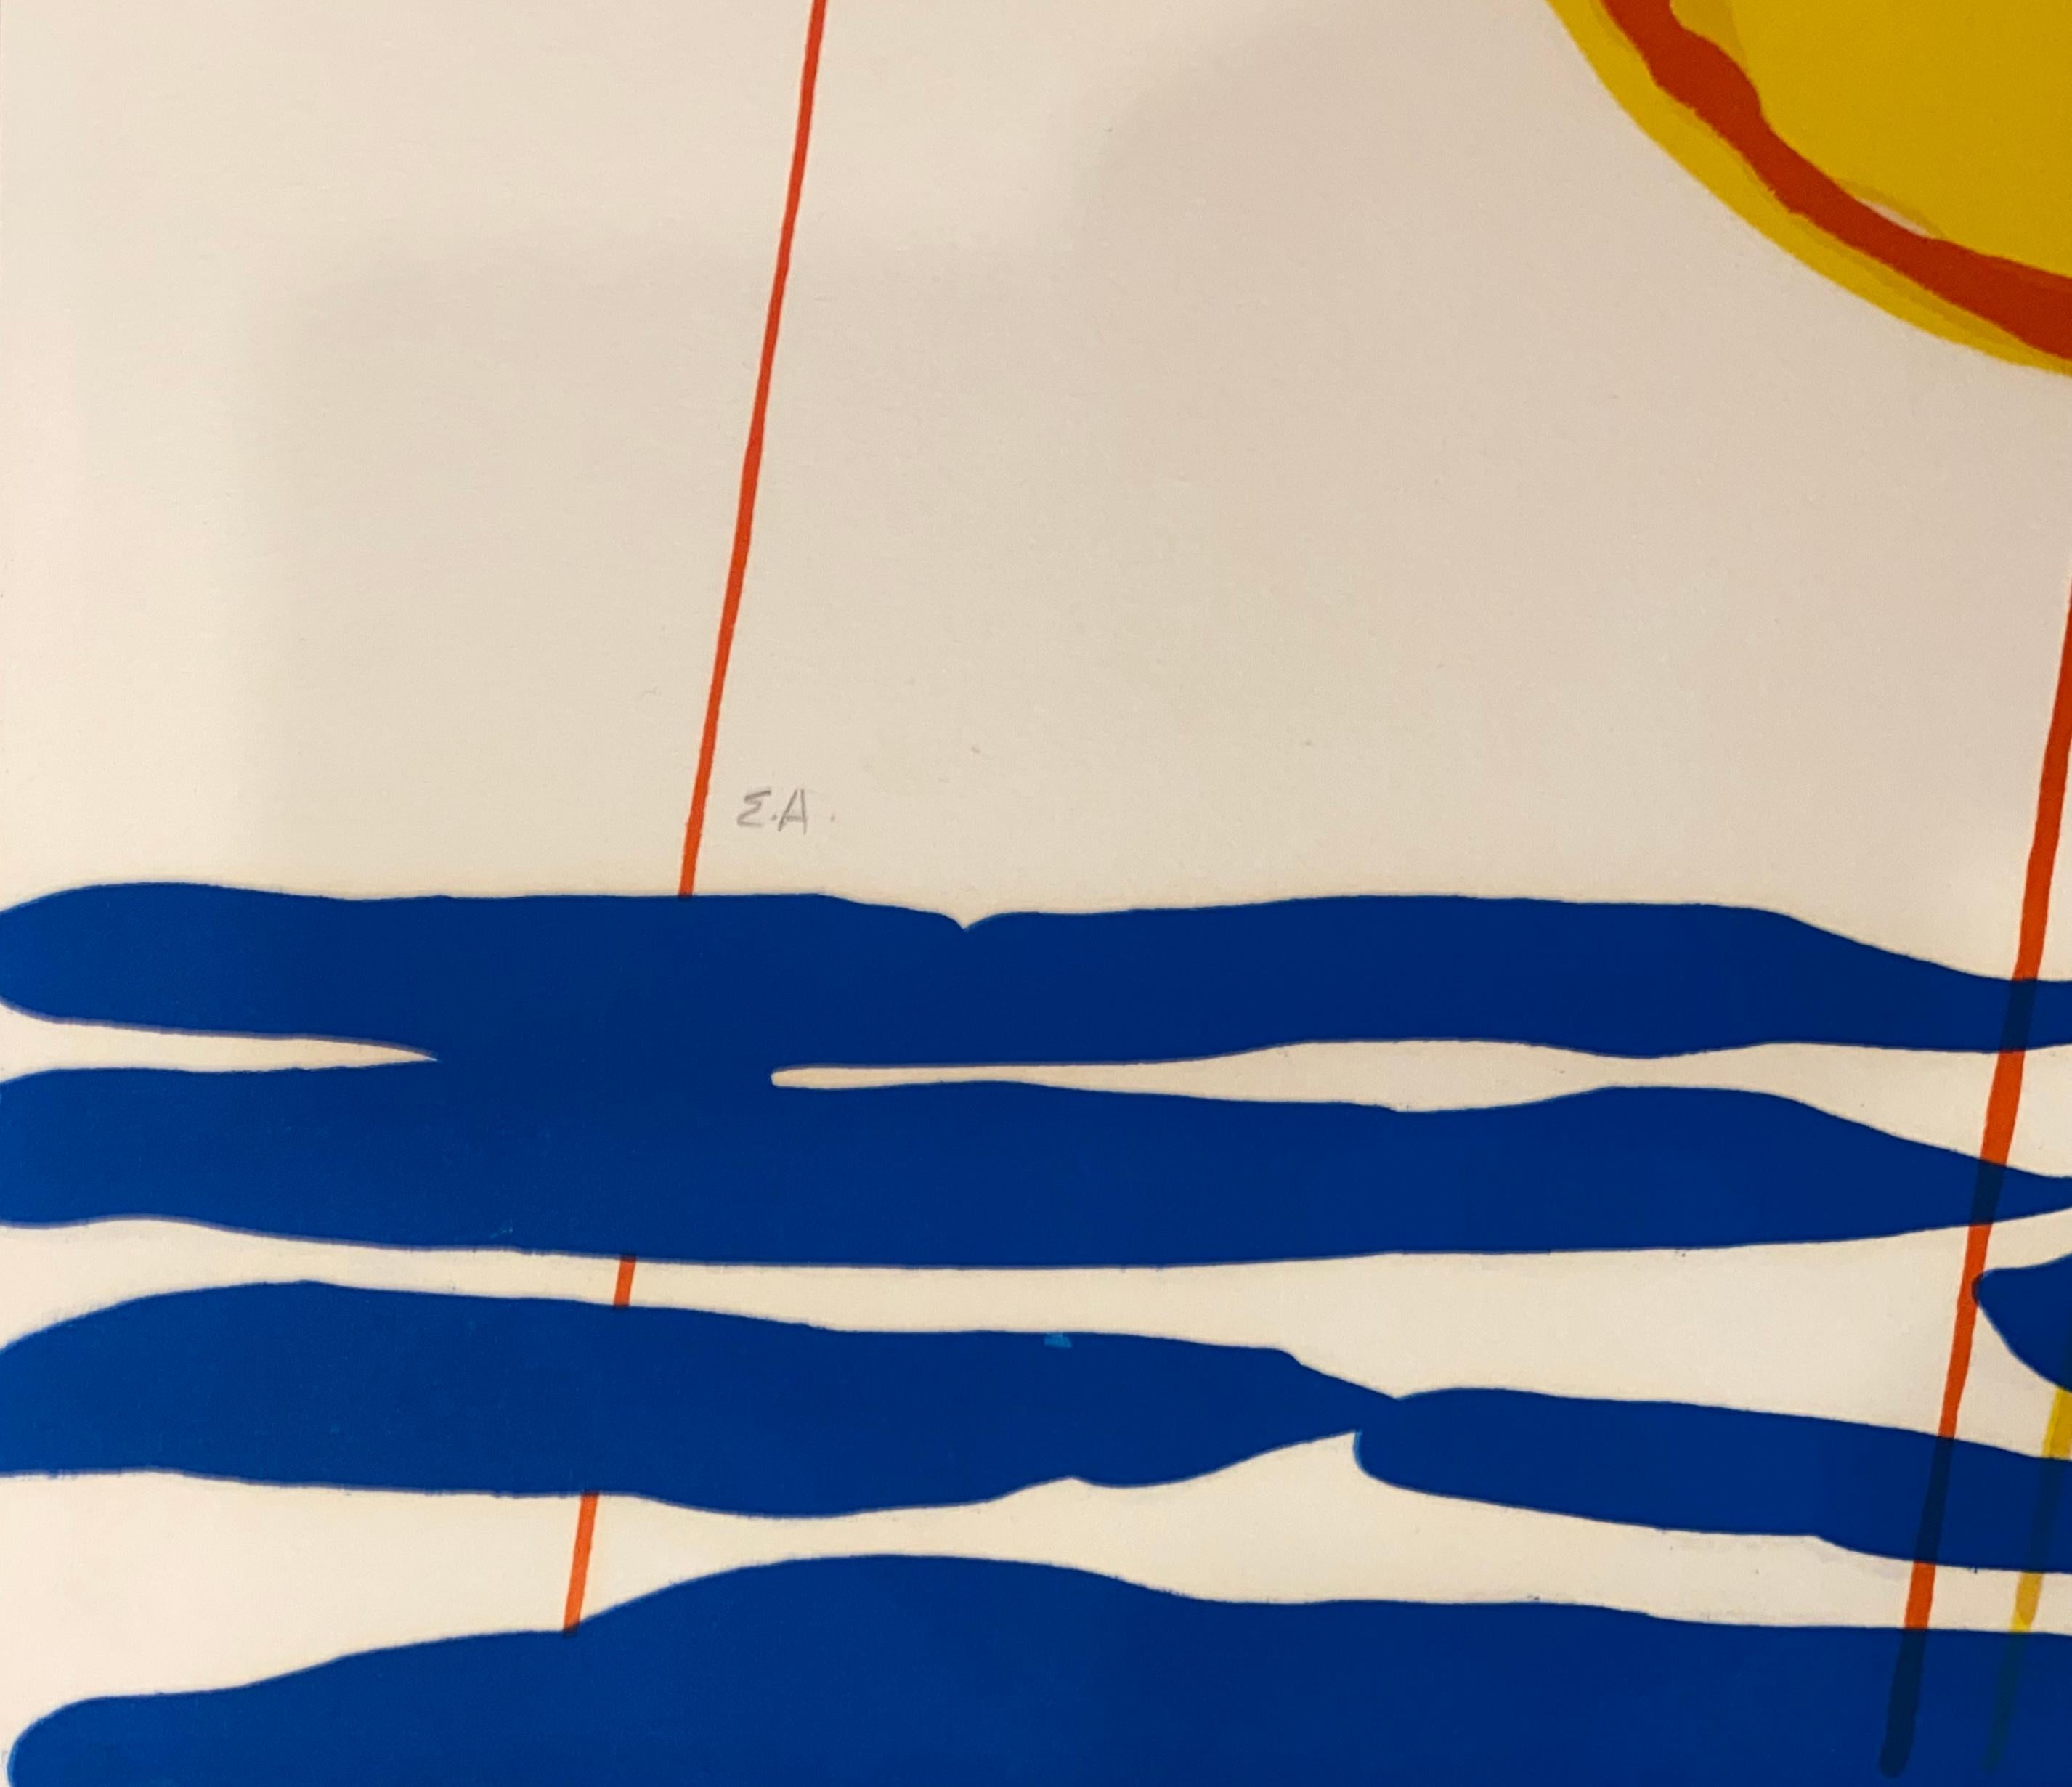 Alexander Calder (American, 1898-1976)
“Seascape”, 1974
Lithograph in Colors on Wove Paper
Signed: Calder (Lower, Right)
Sheet Size: 39 3/5 × 28 in 
Marked “EA”, apart from an edition of 150 (Lower, Left)

Condition Report: Some very slight uneven